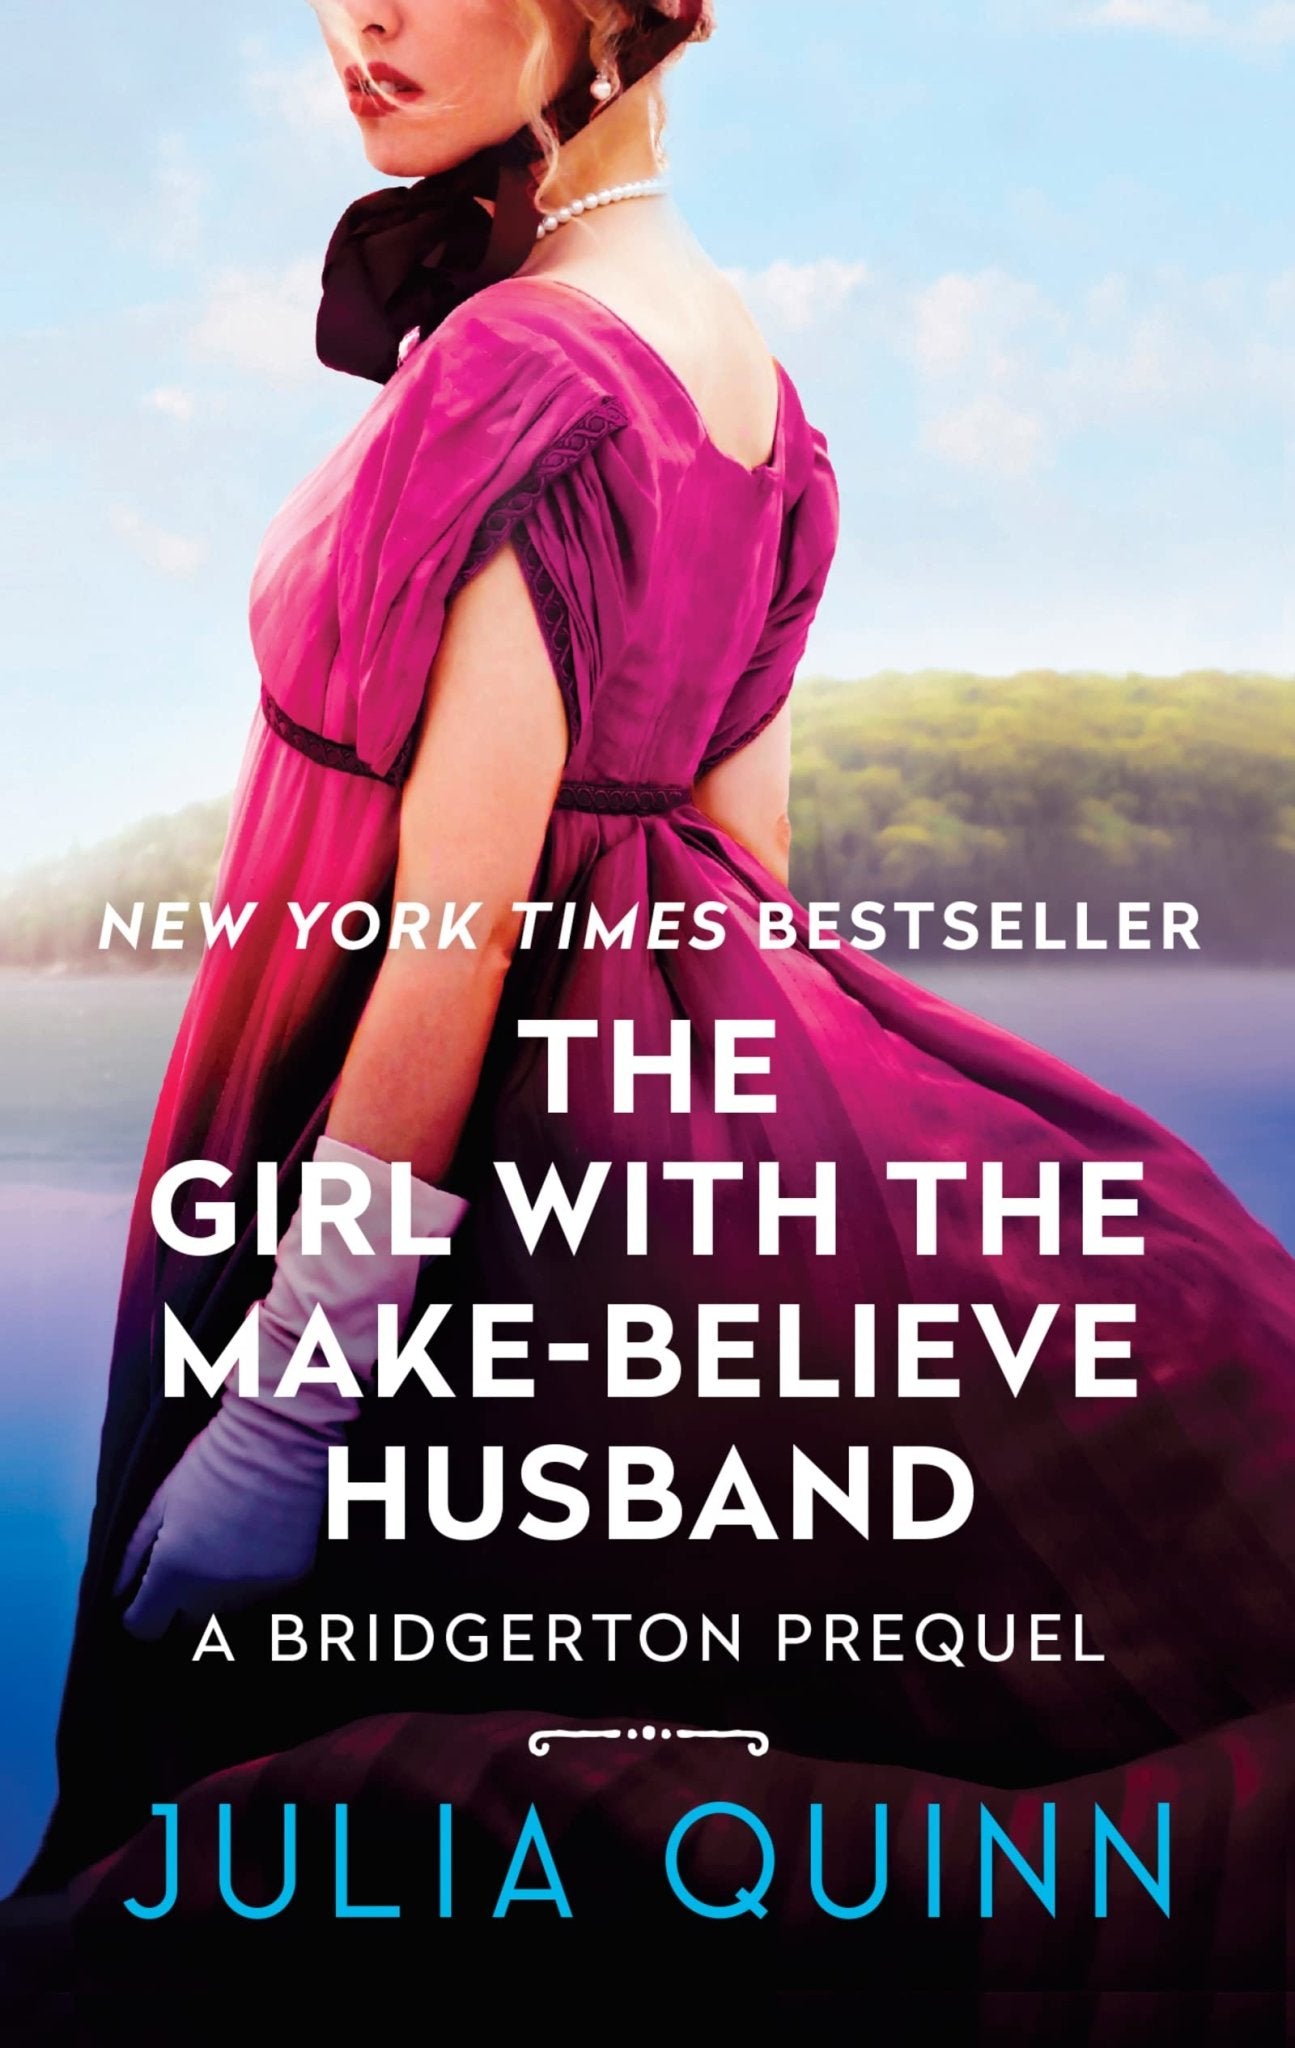 The Girl with the Make-Believe Husband: A Bridgerton Prequel #2 by Julia Quinn [Paperback] - LV'S Global Media